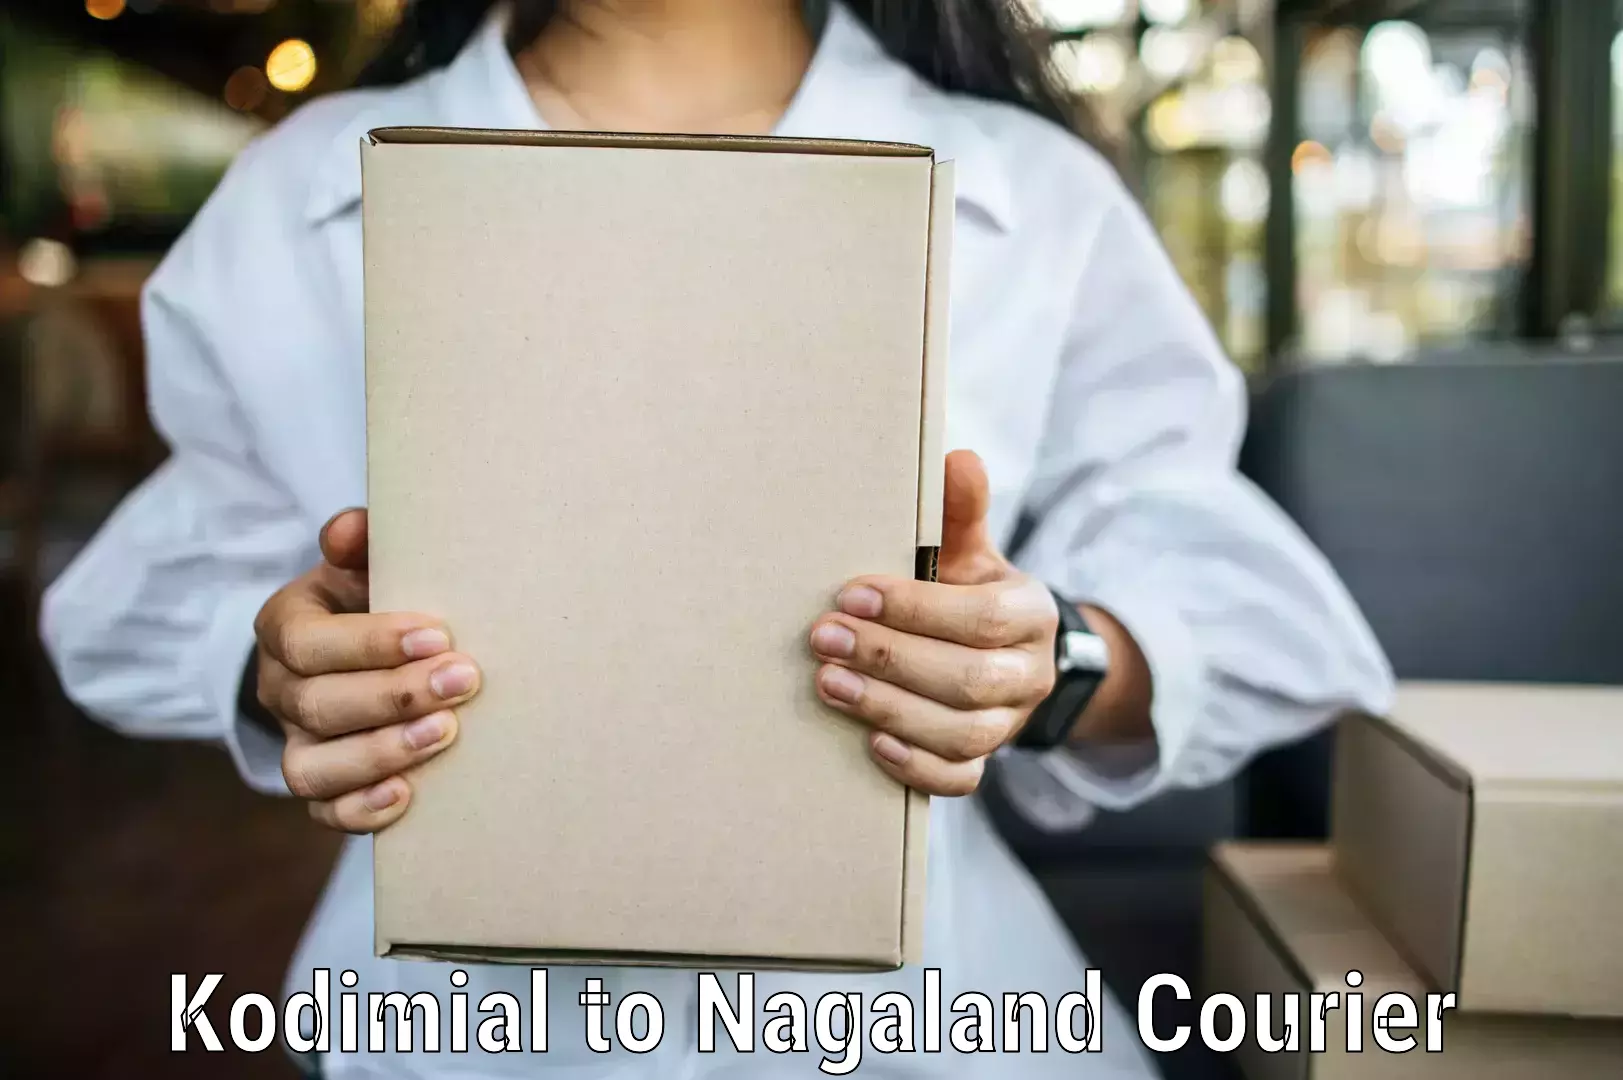 Multi-national courier services Kodimial to Nagaland